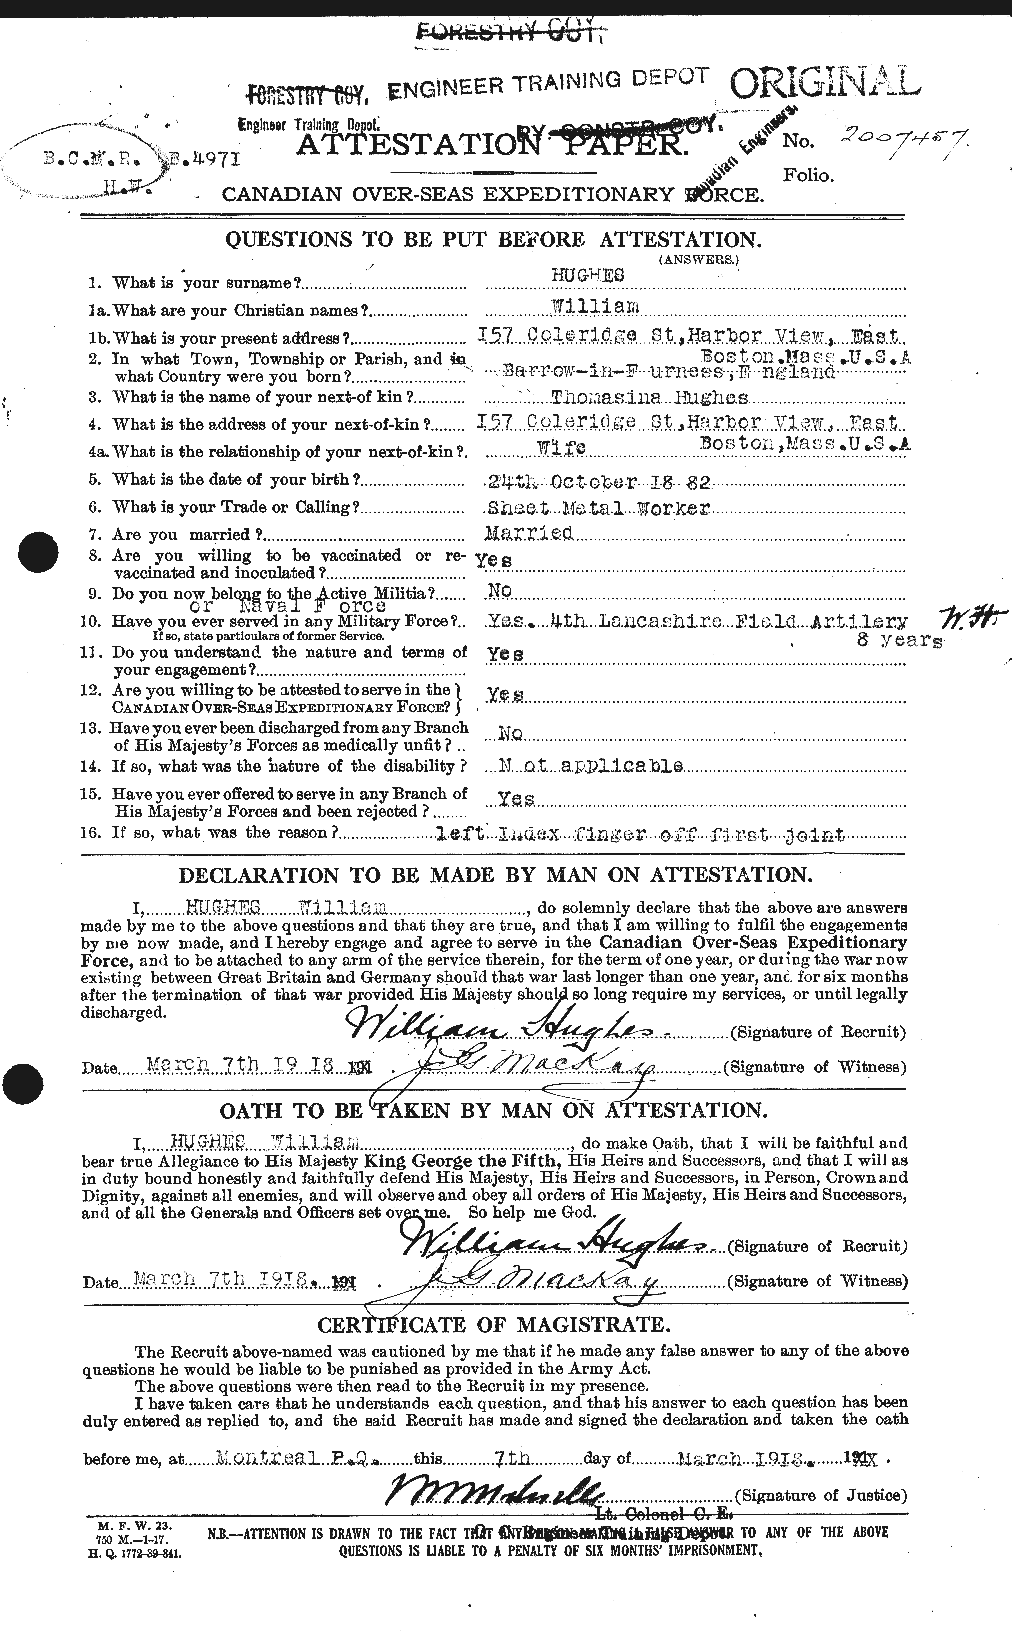 Personnel Records of the First World War - CEF 405889a